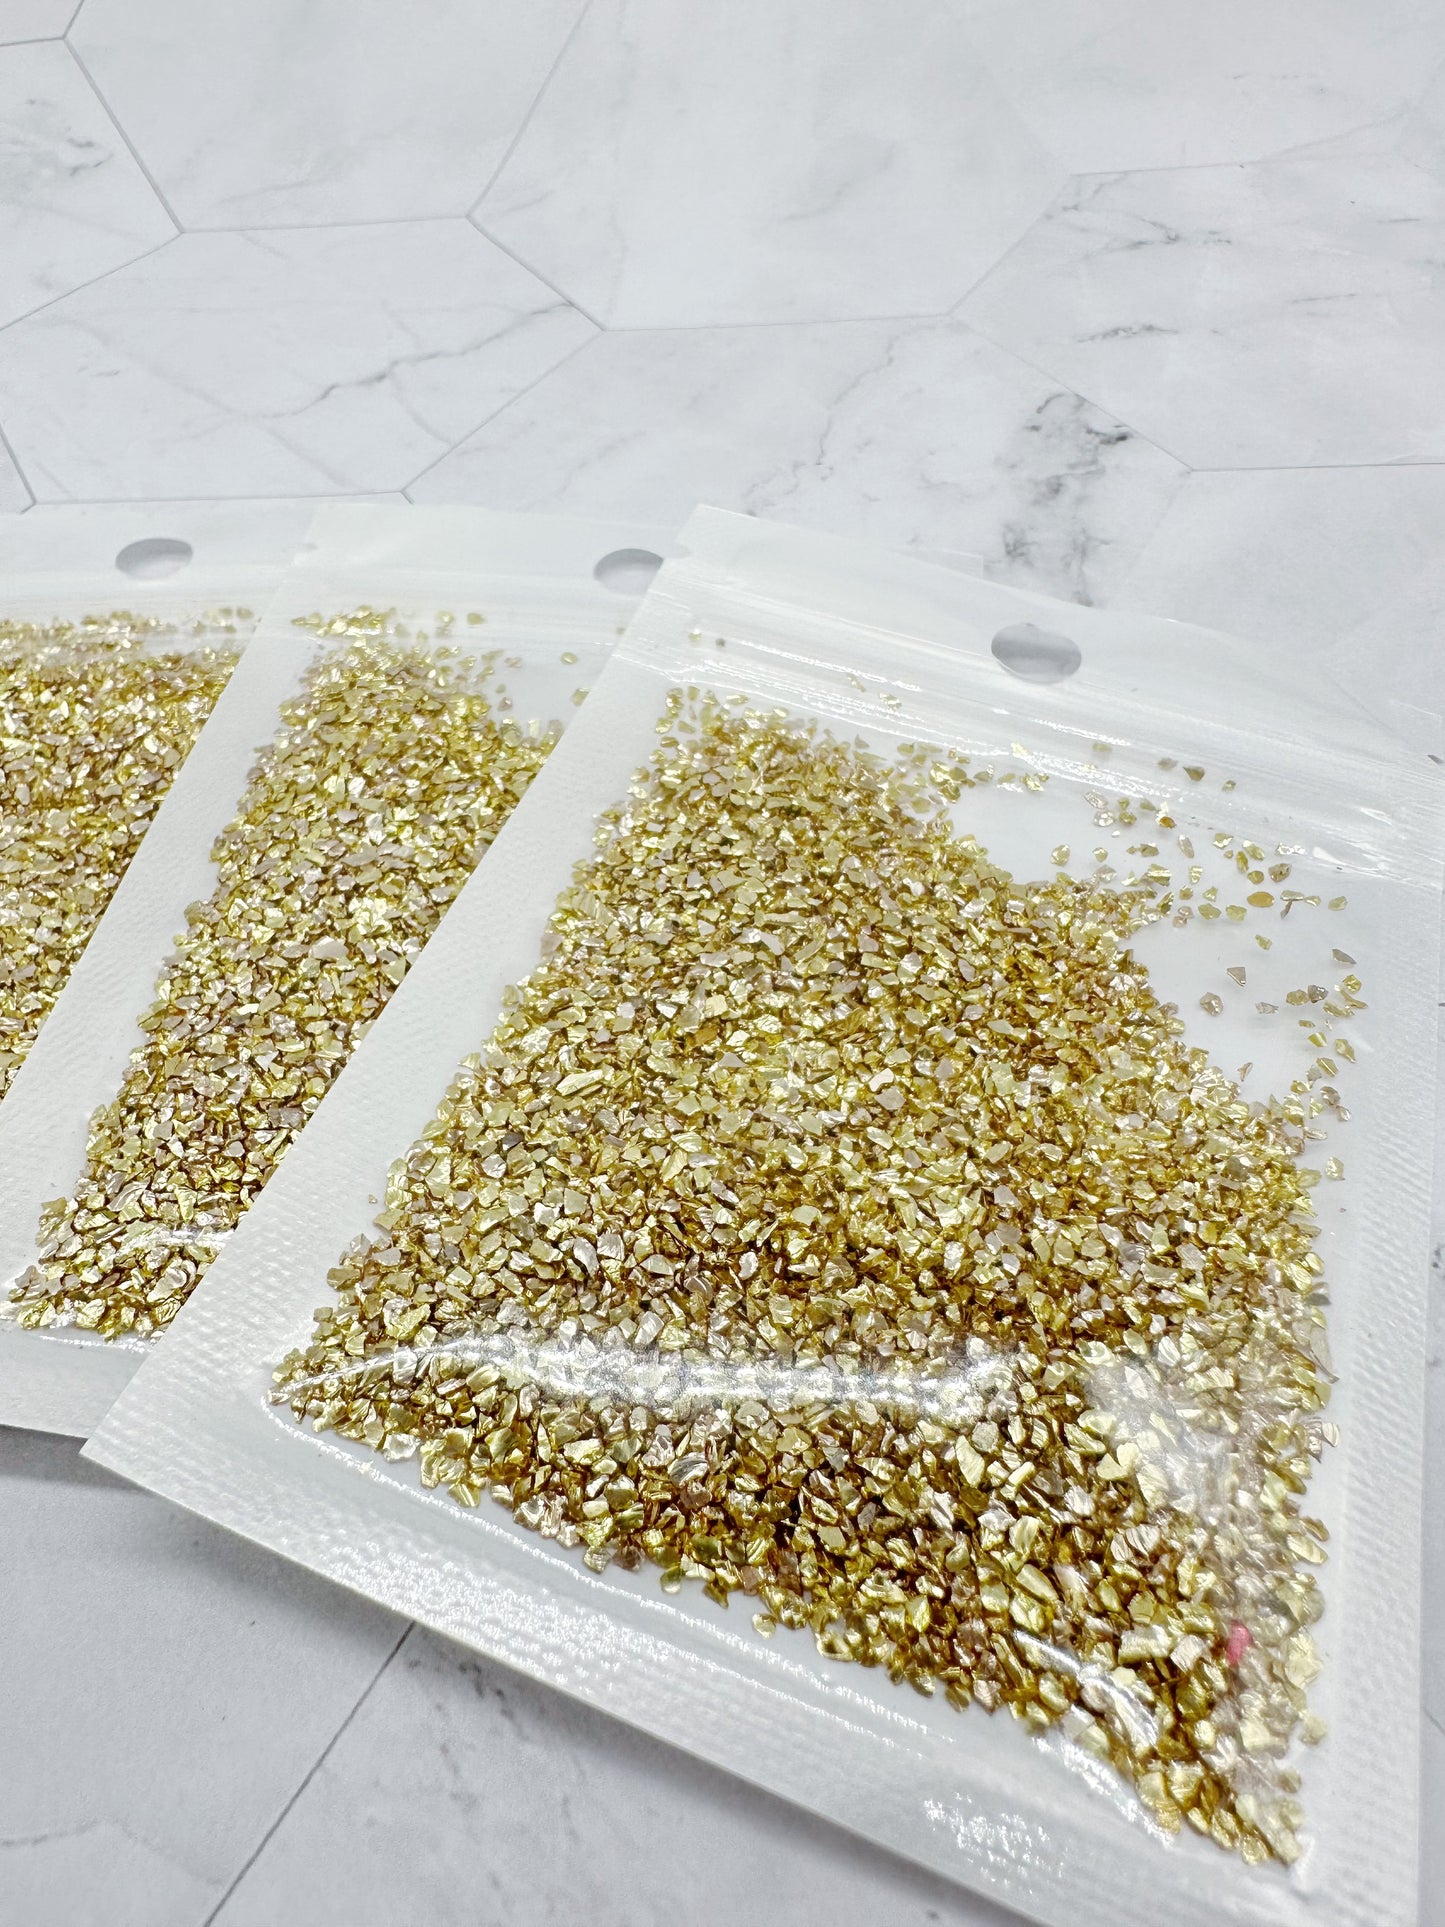 Gold Fine Crushed Glass 1-1.5 mm